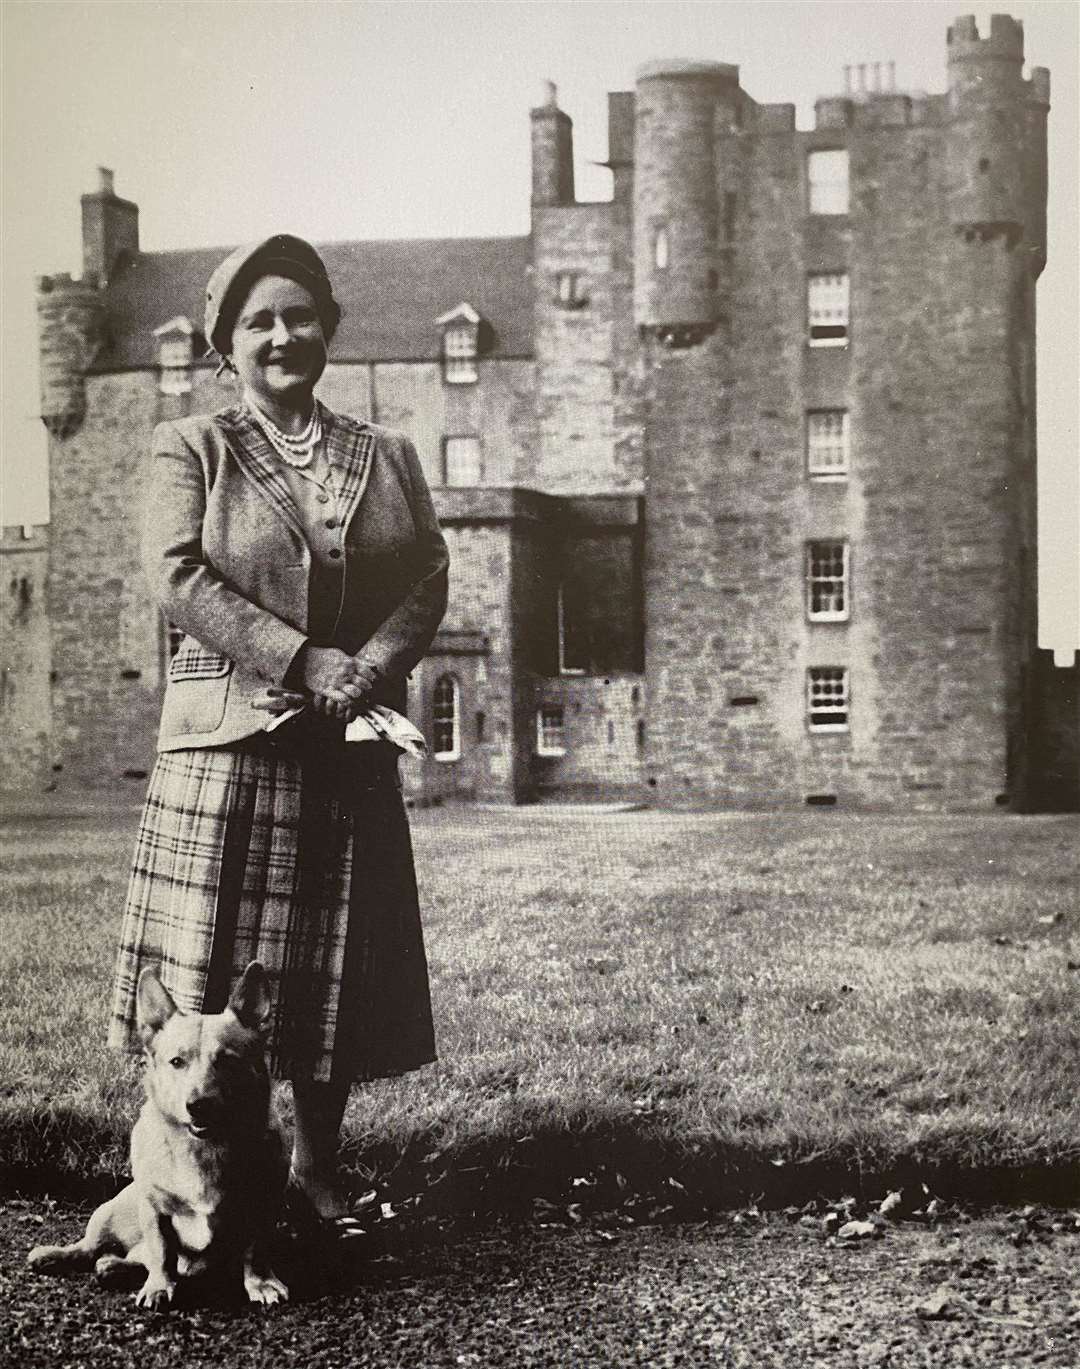 The royal family have had a long association with corgis. The Queen Mother with Honey, one of her favourite corgis, at the Castle of Mey.